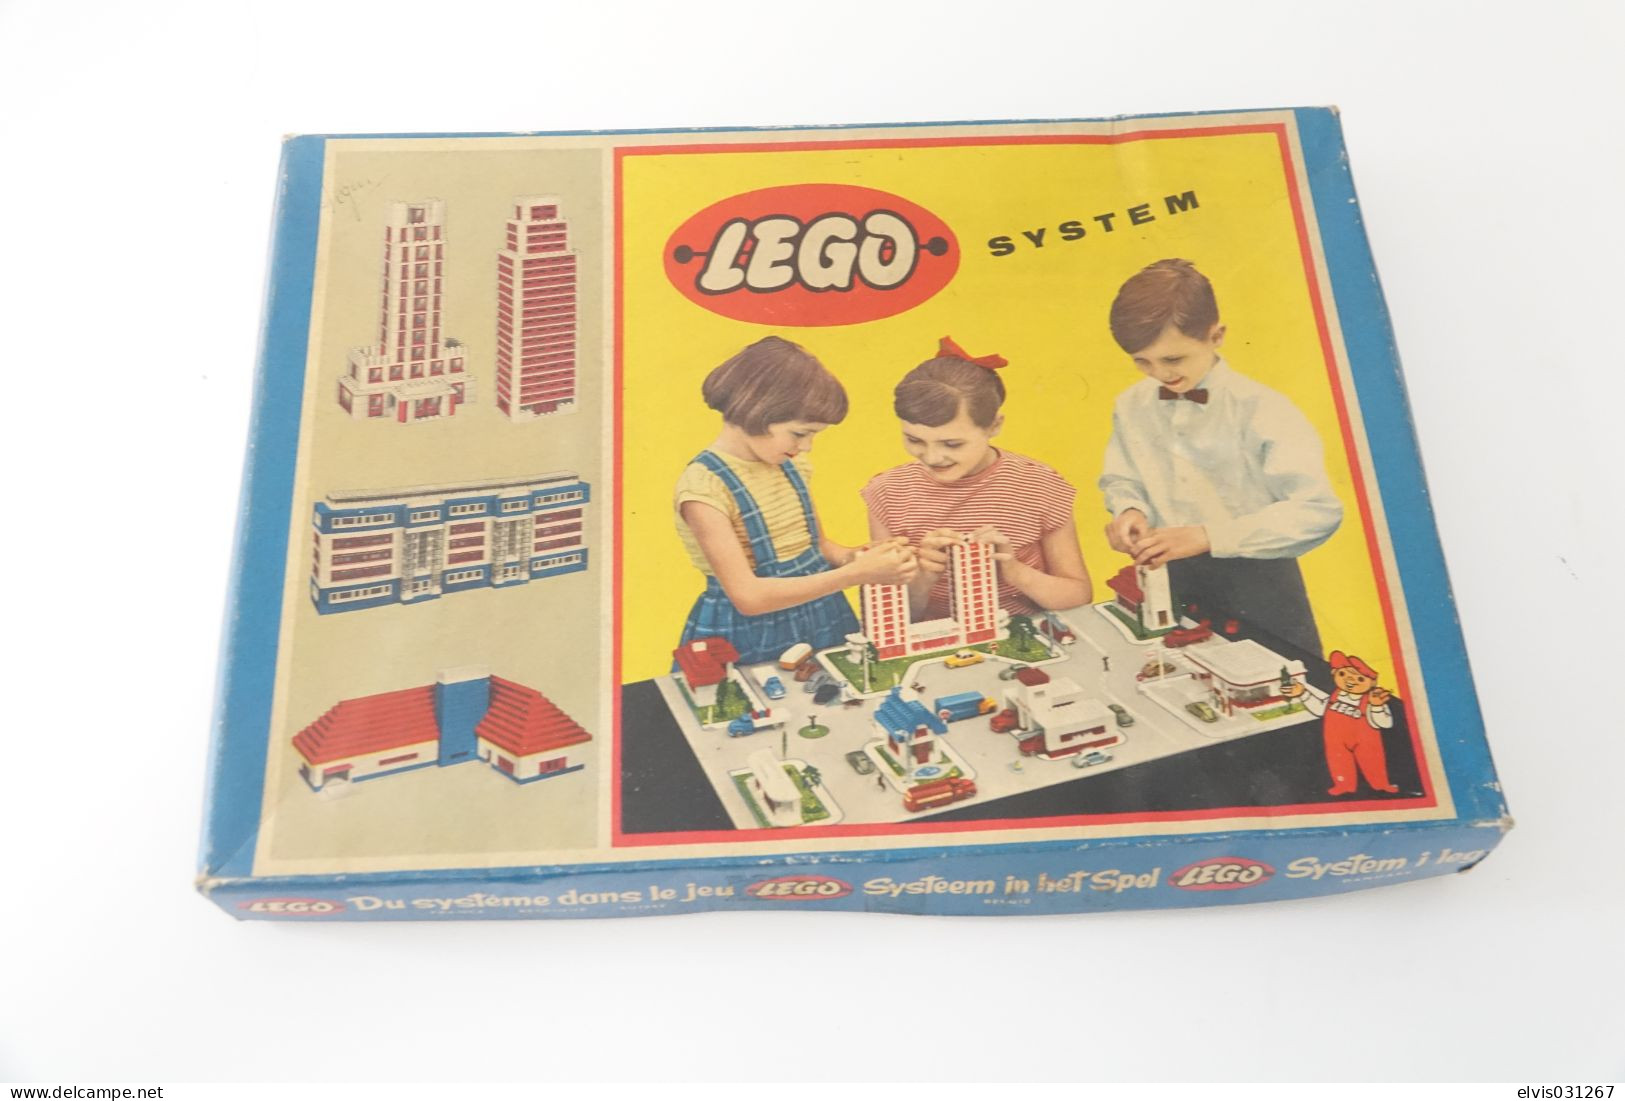 LEGO - 700/3a Gift Package (Lego Mursten) Extremely Rare BOX ONLY - Collector Item - Original Lego 1954 - Vintage - Catálogos